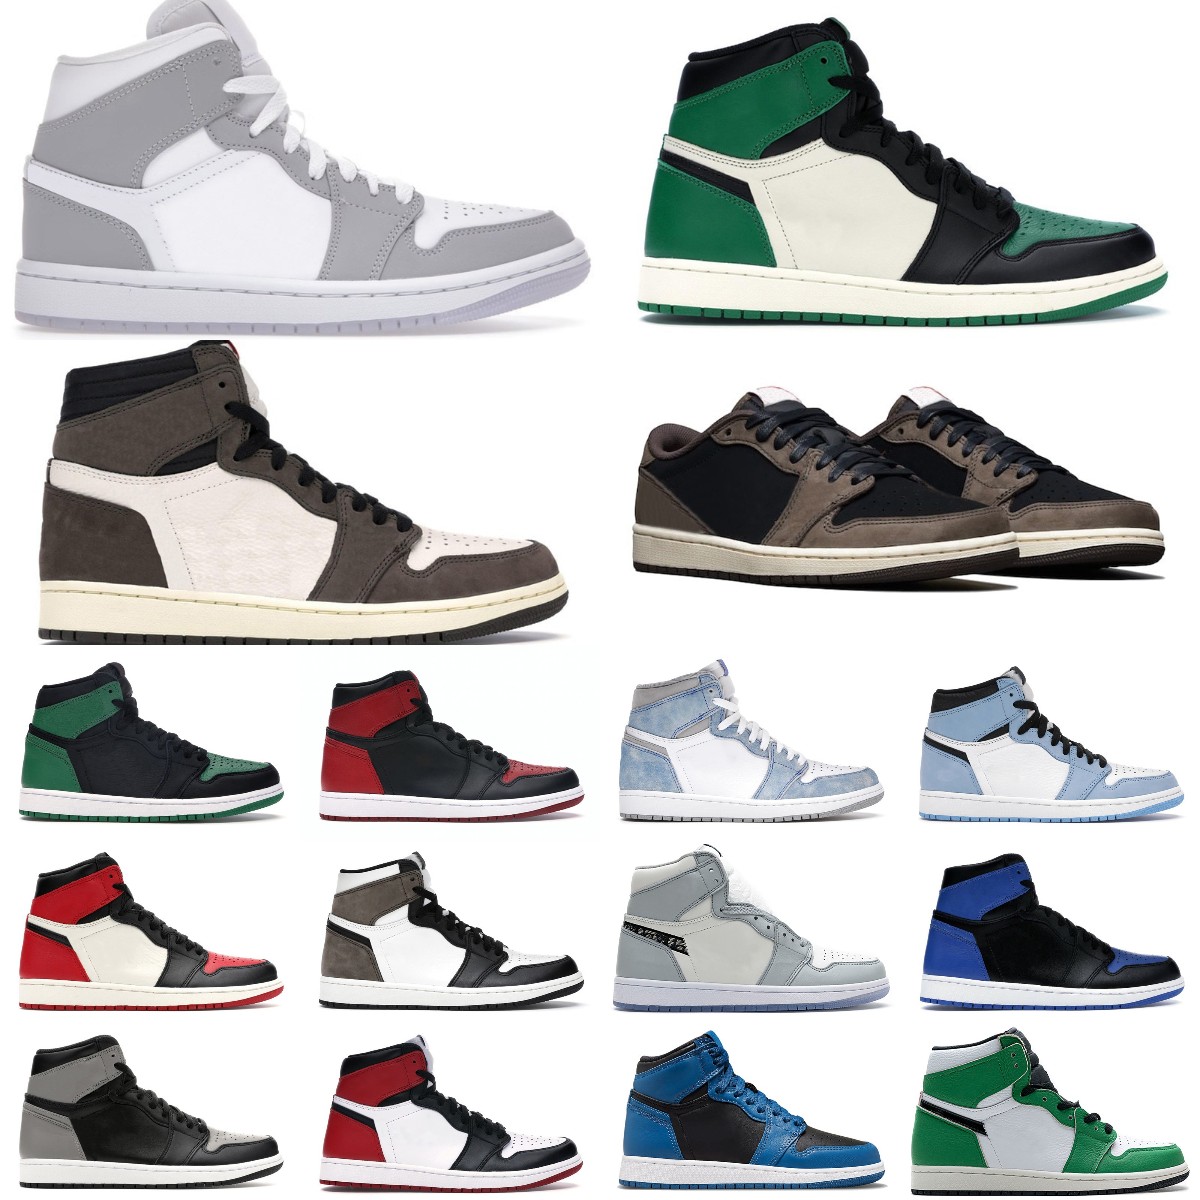 New OG Lost Found 1 Basketball Shoes 1s Lage Reverse Mocha Sail Black zeester taxi Chicago Bred Patent Gorge Green Mens Trainer Sports Sneakers 36-47